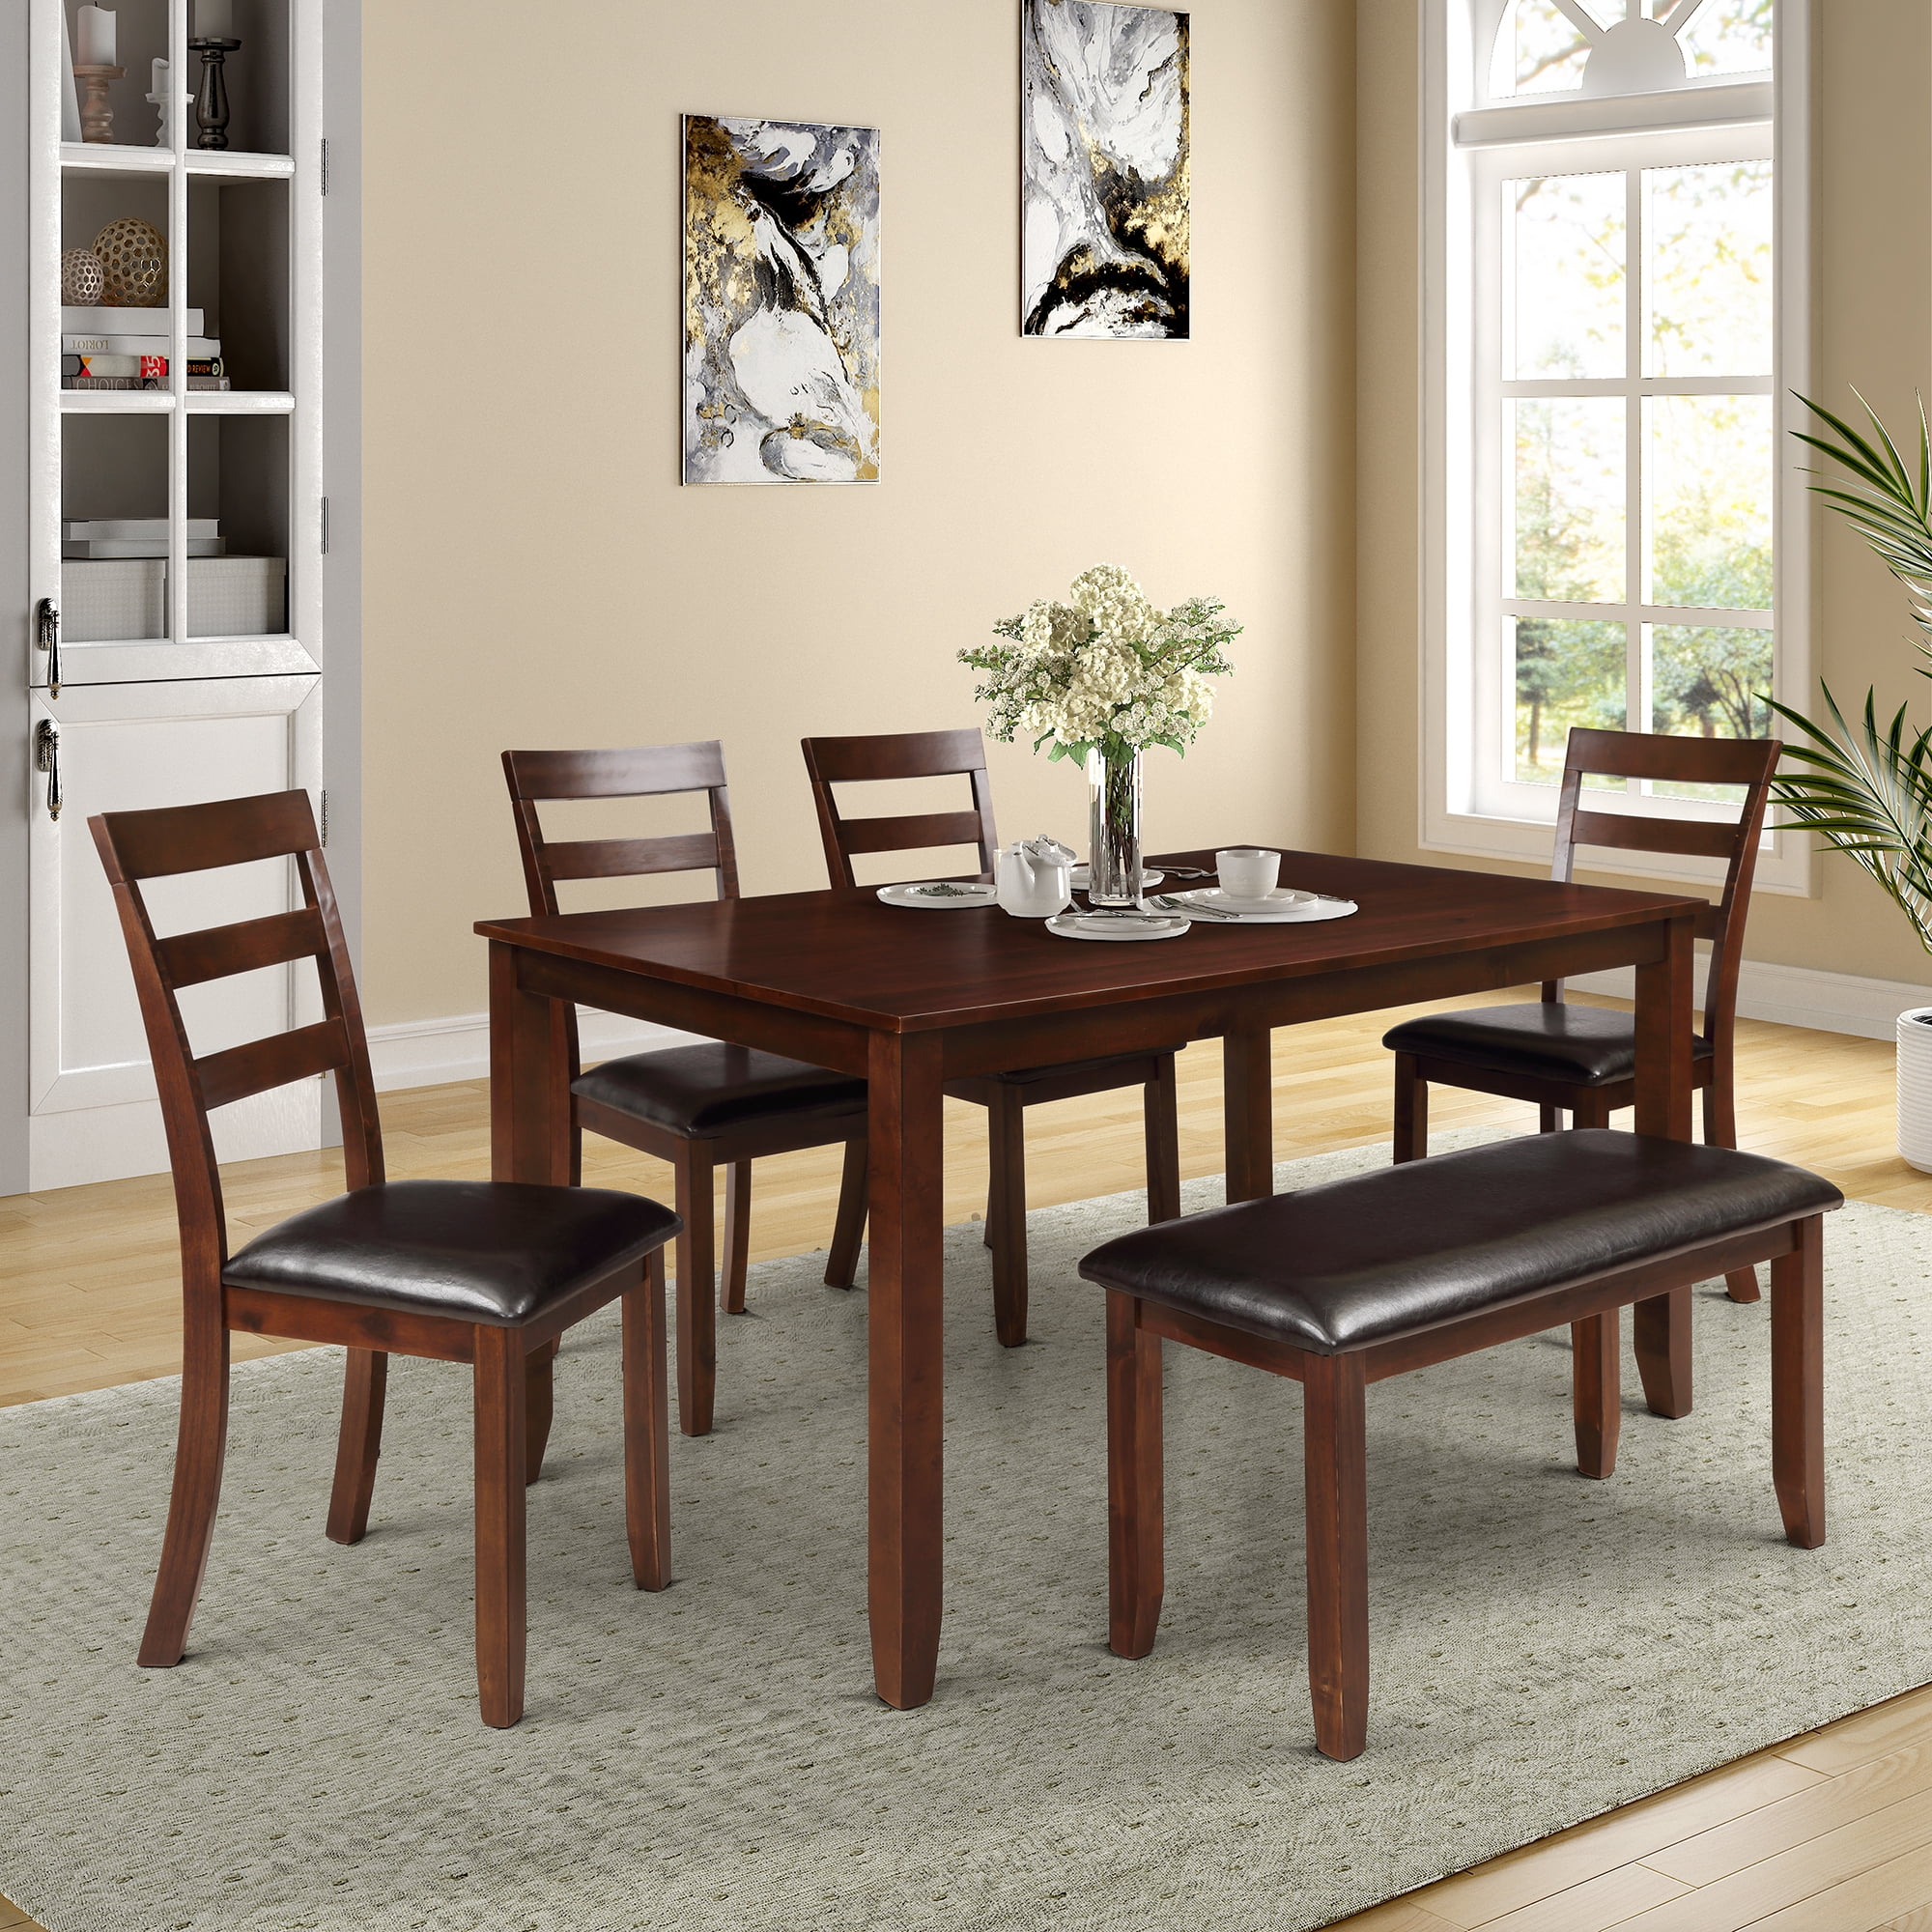 Clearance Dining Table Sets For 6